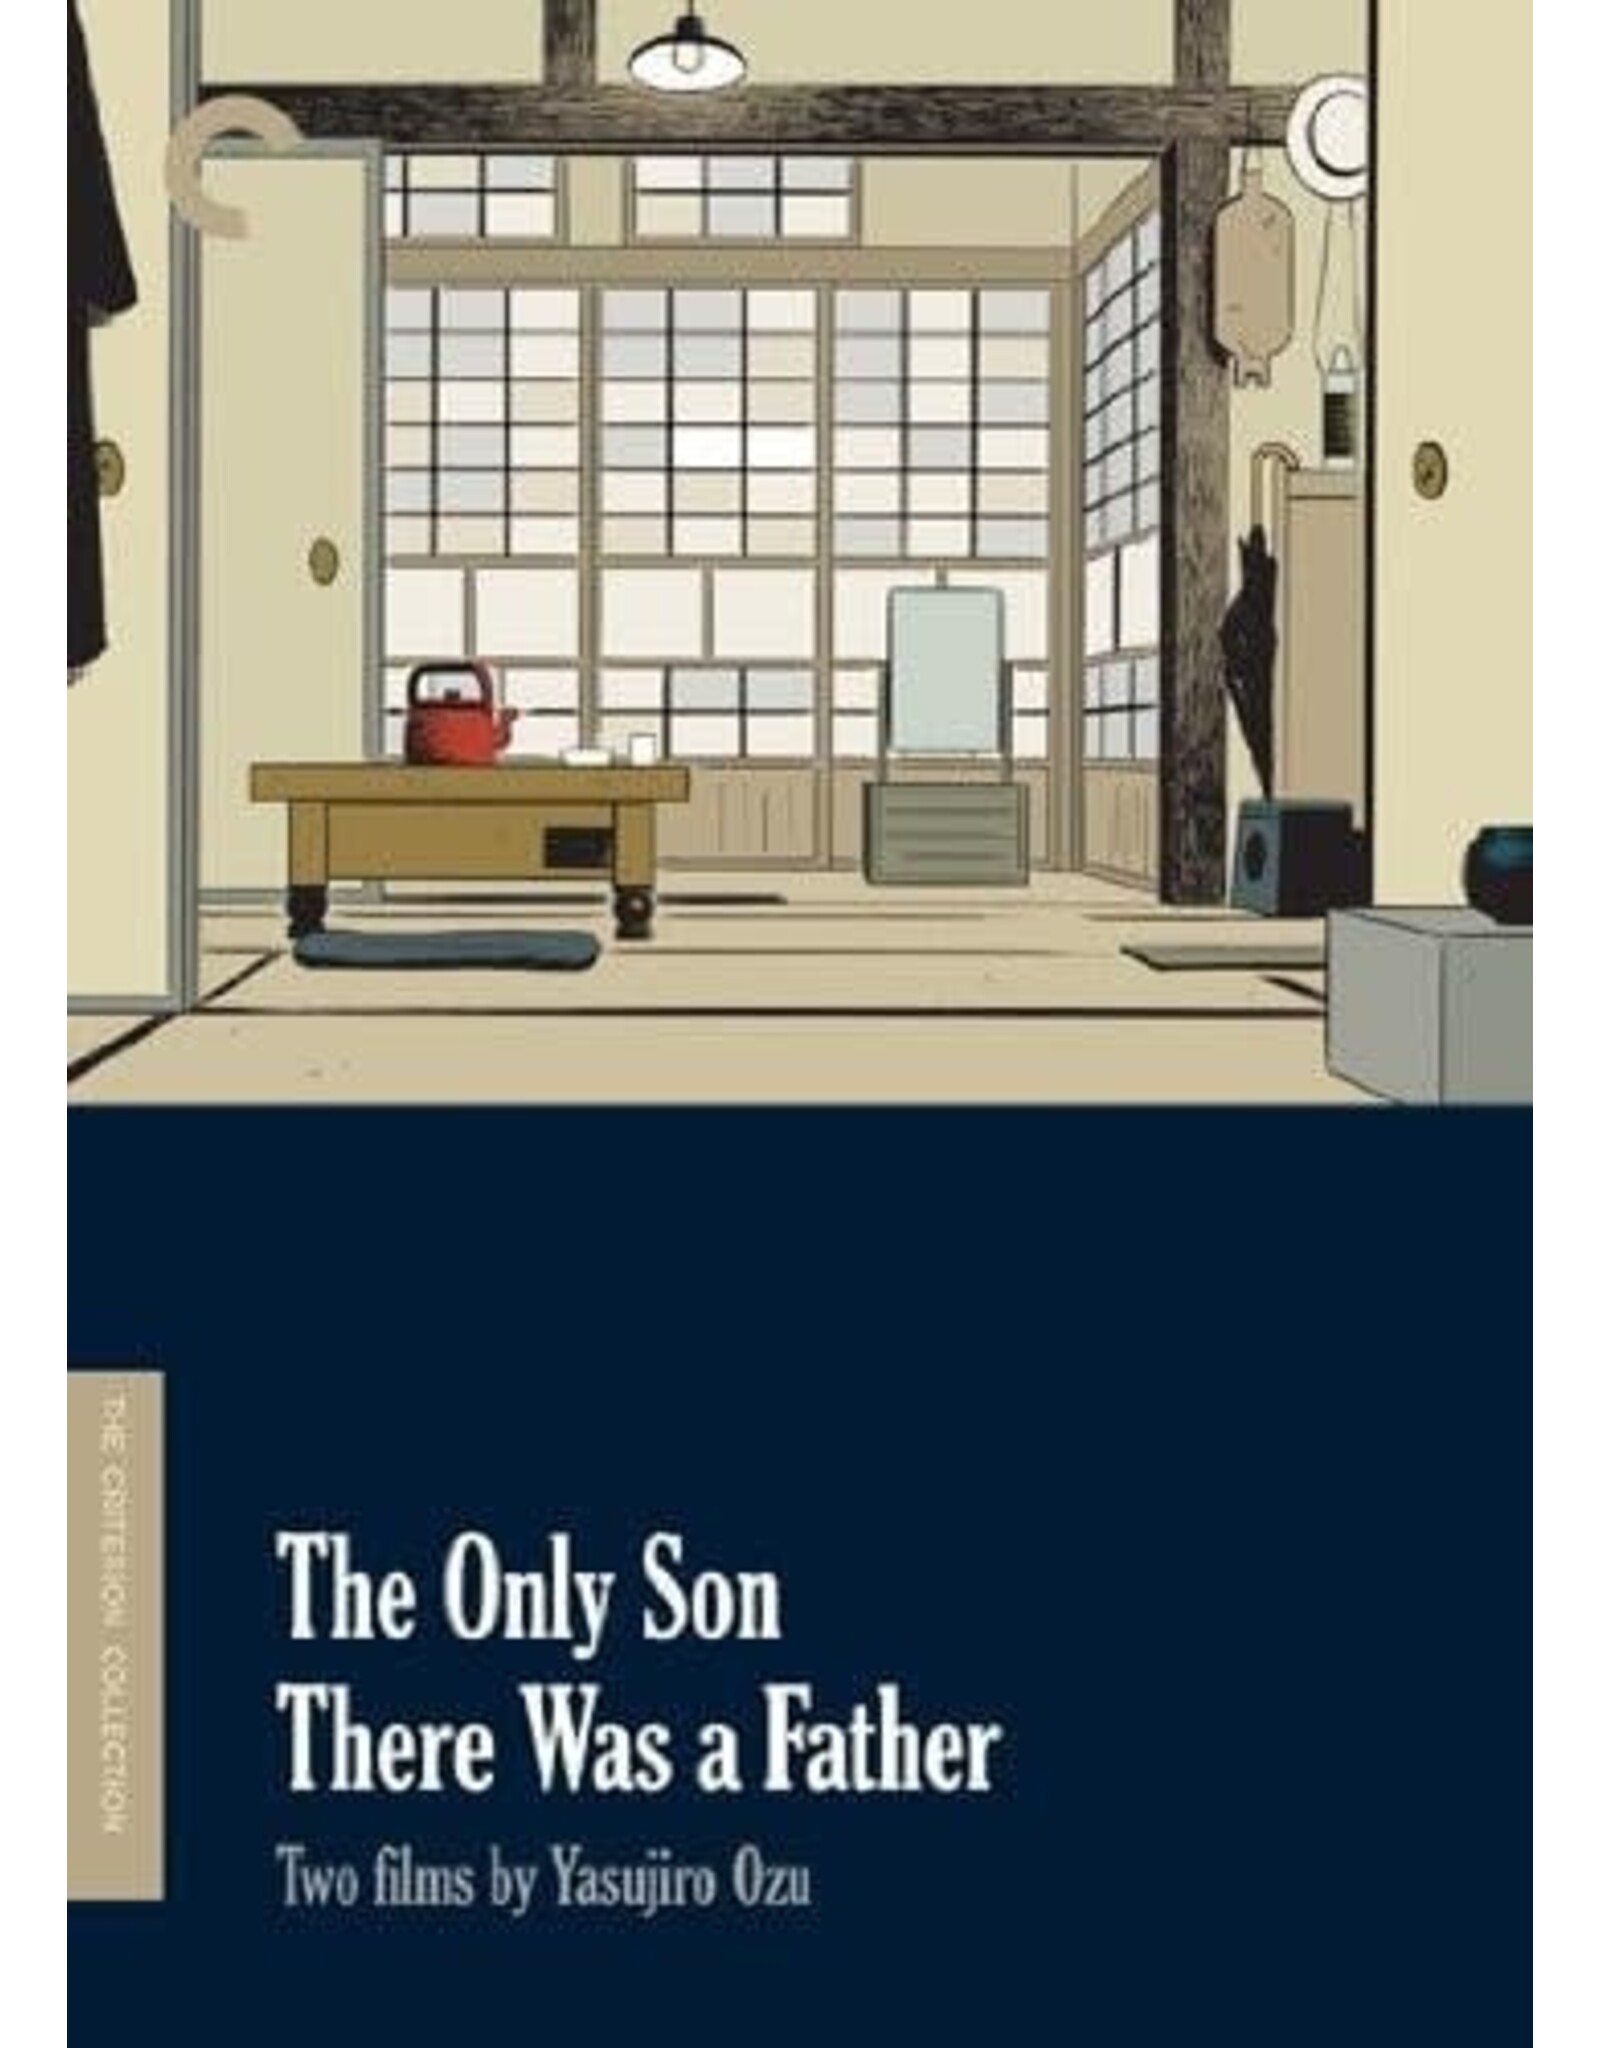 Criterion Collection Only Son, The / There Was A Father Two Films by Yasujiro Ozu - Criterion Collection (Used)